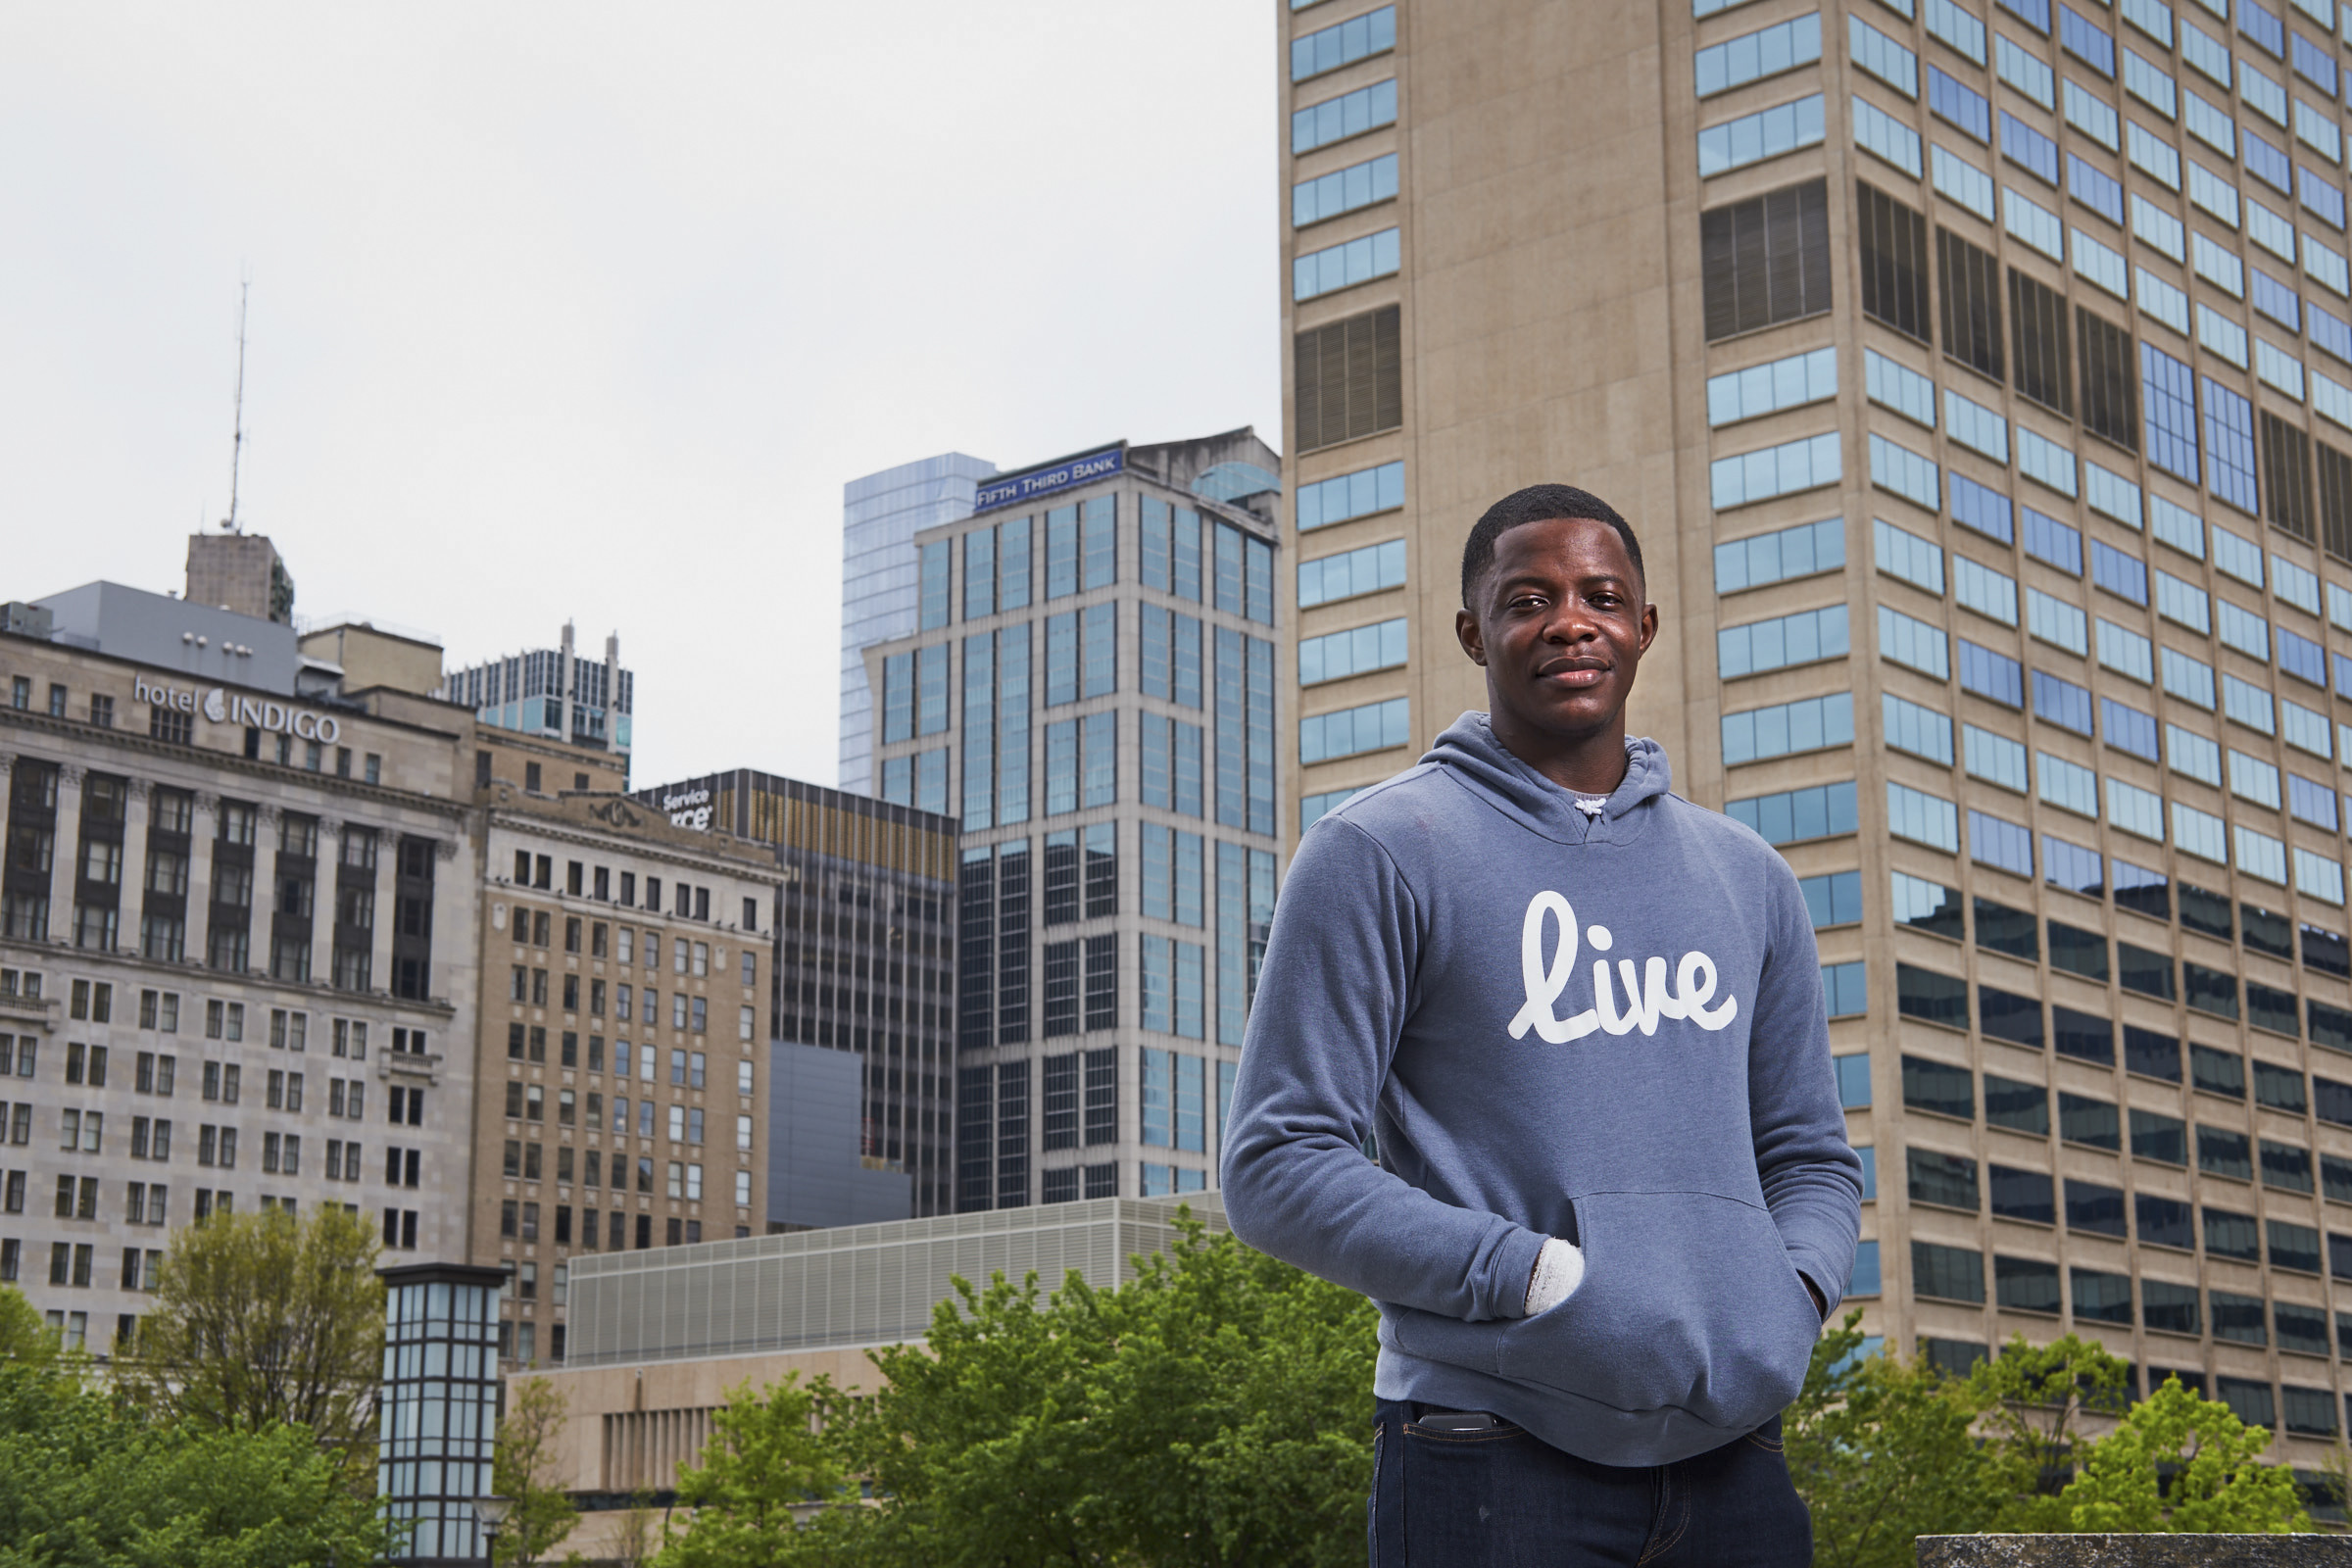 PHOTO: James Shaw Jr., who disarmed the man who opened fire at a Waffle House, poses for a photo in Nashville, Tenn., April 23, 2018.